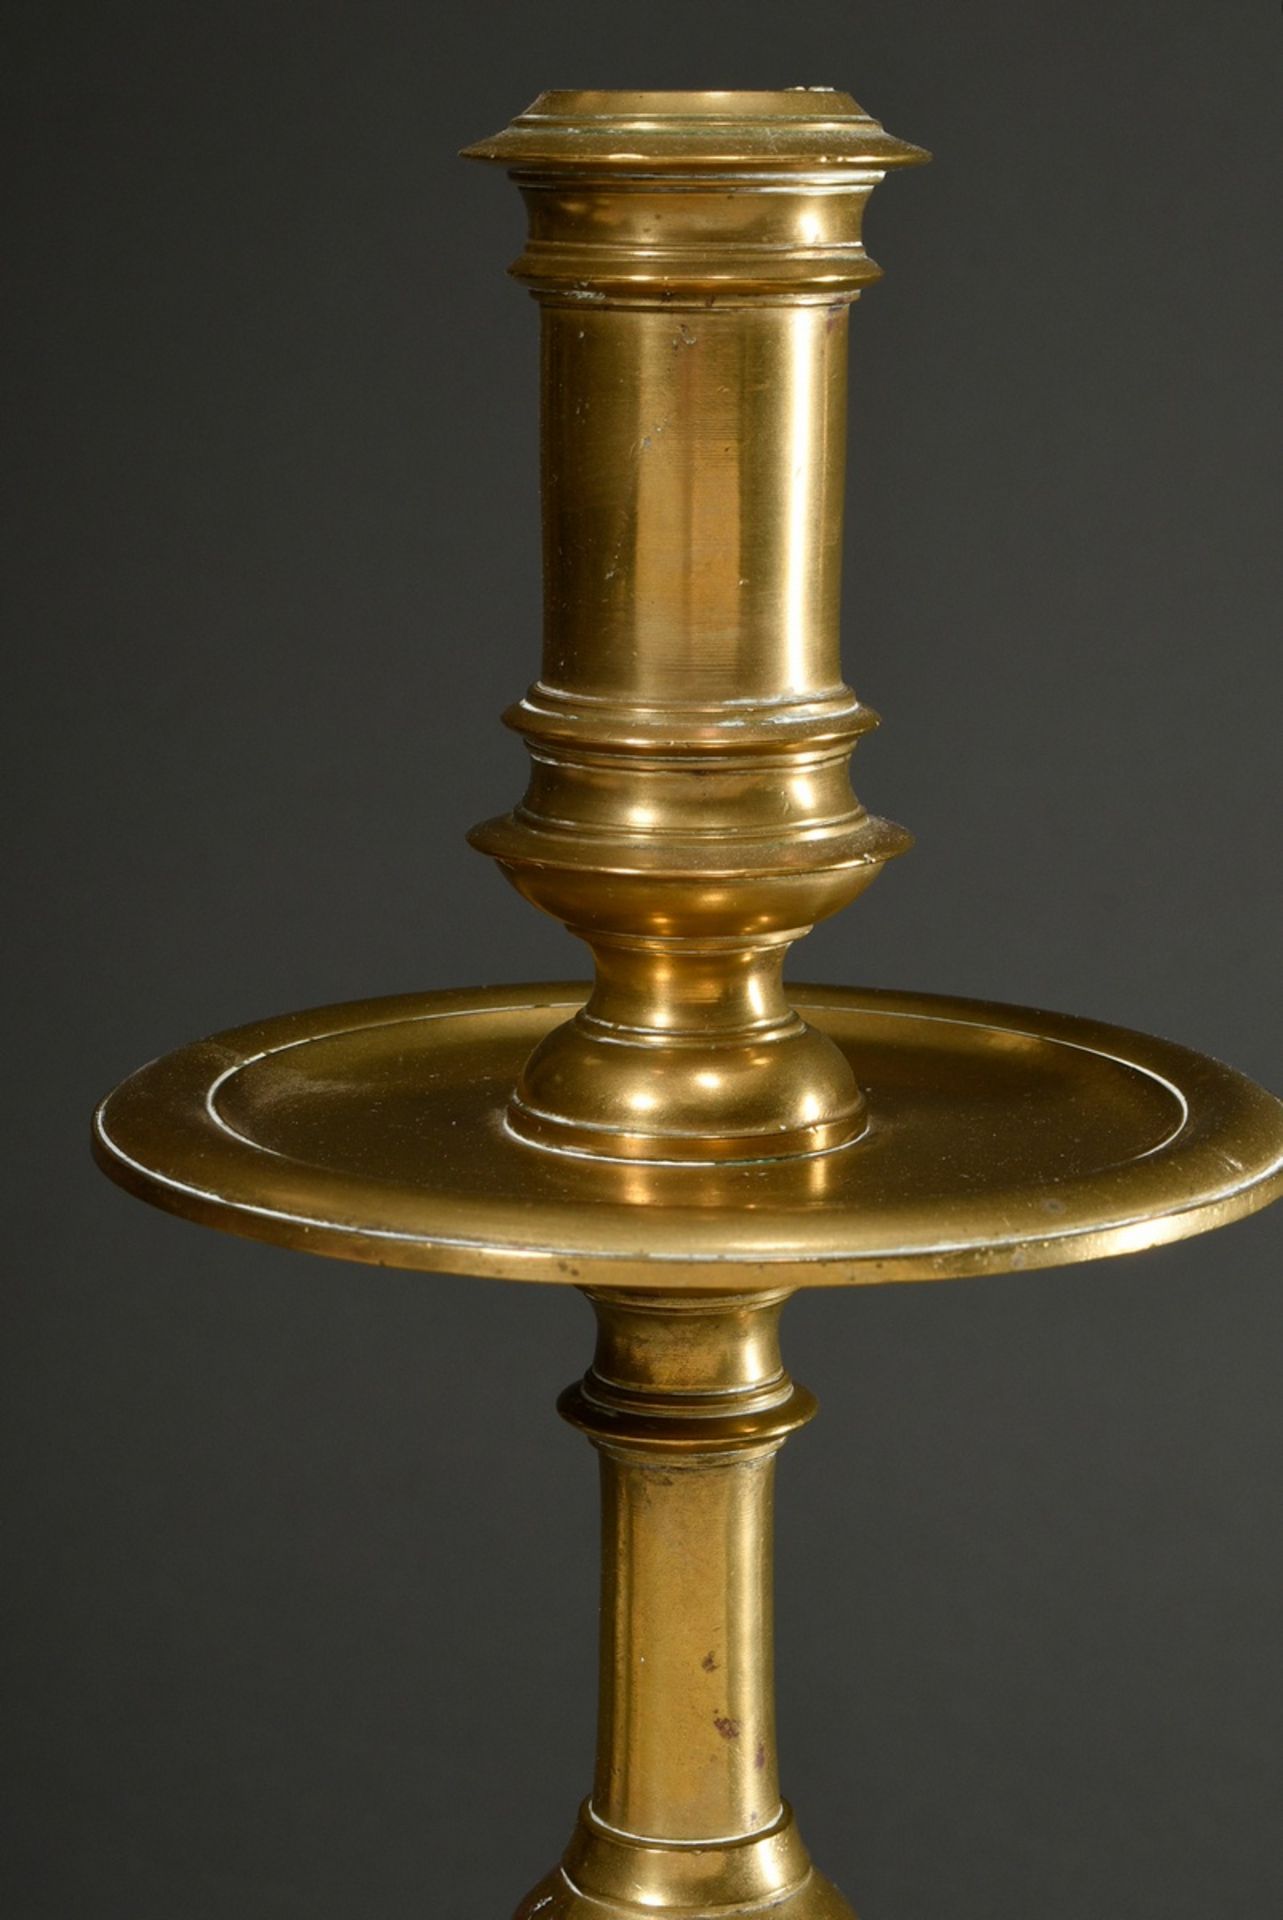 Pair of large yellow cast iron Heemskerk candlesticks with baluster stem and wide drip pans on a ra - Image 2 of 6